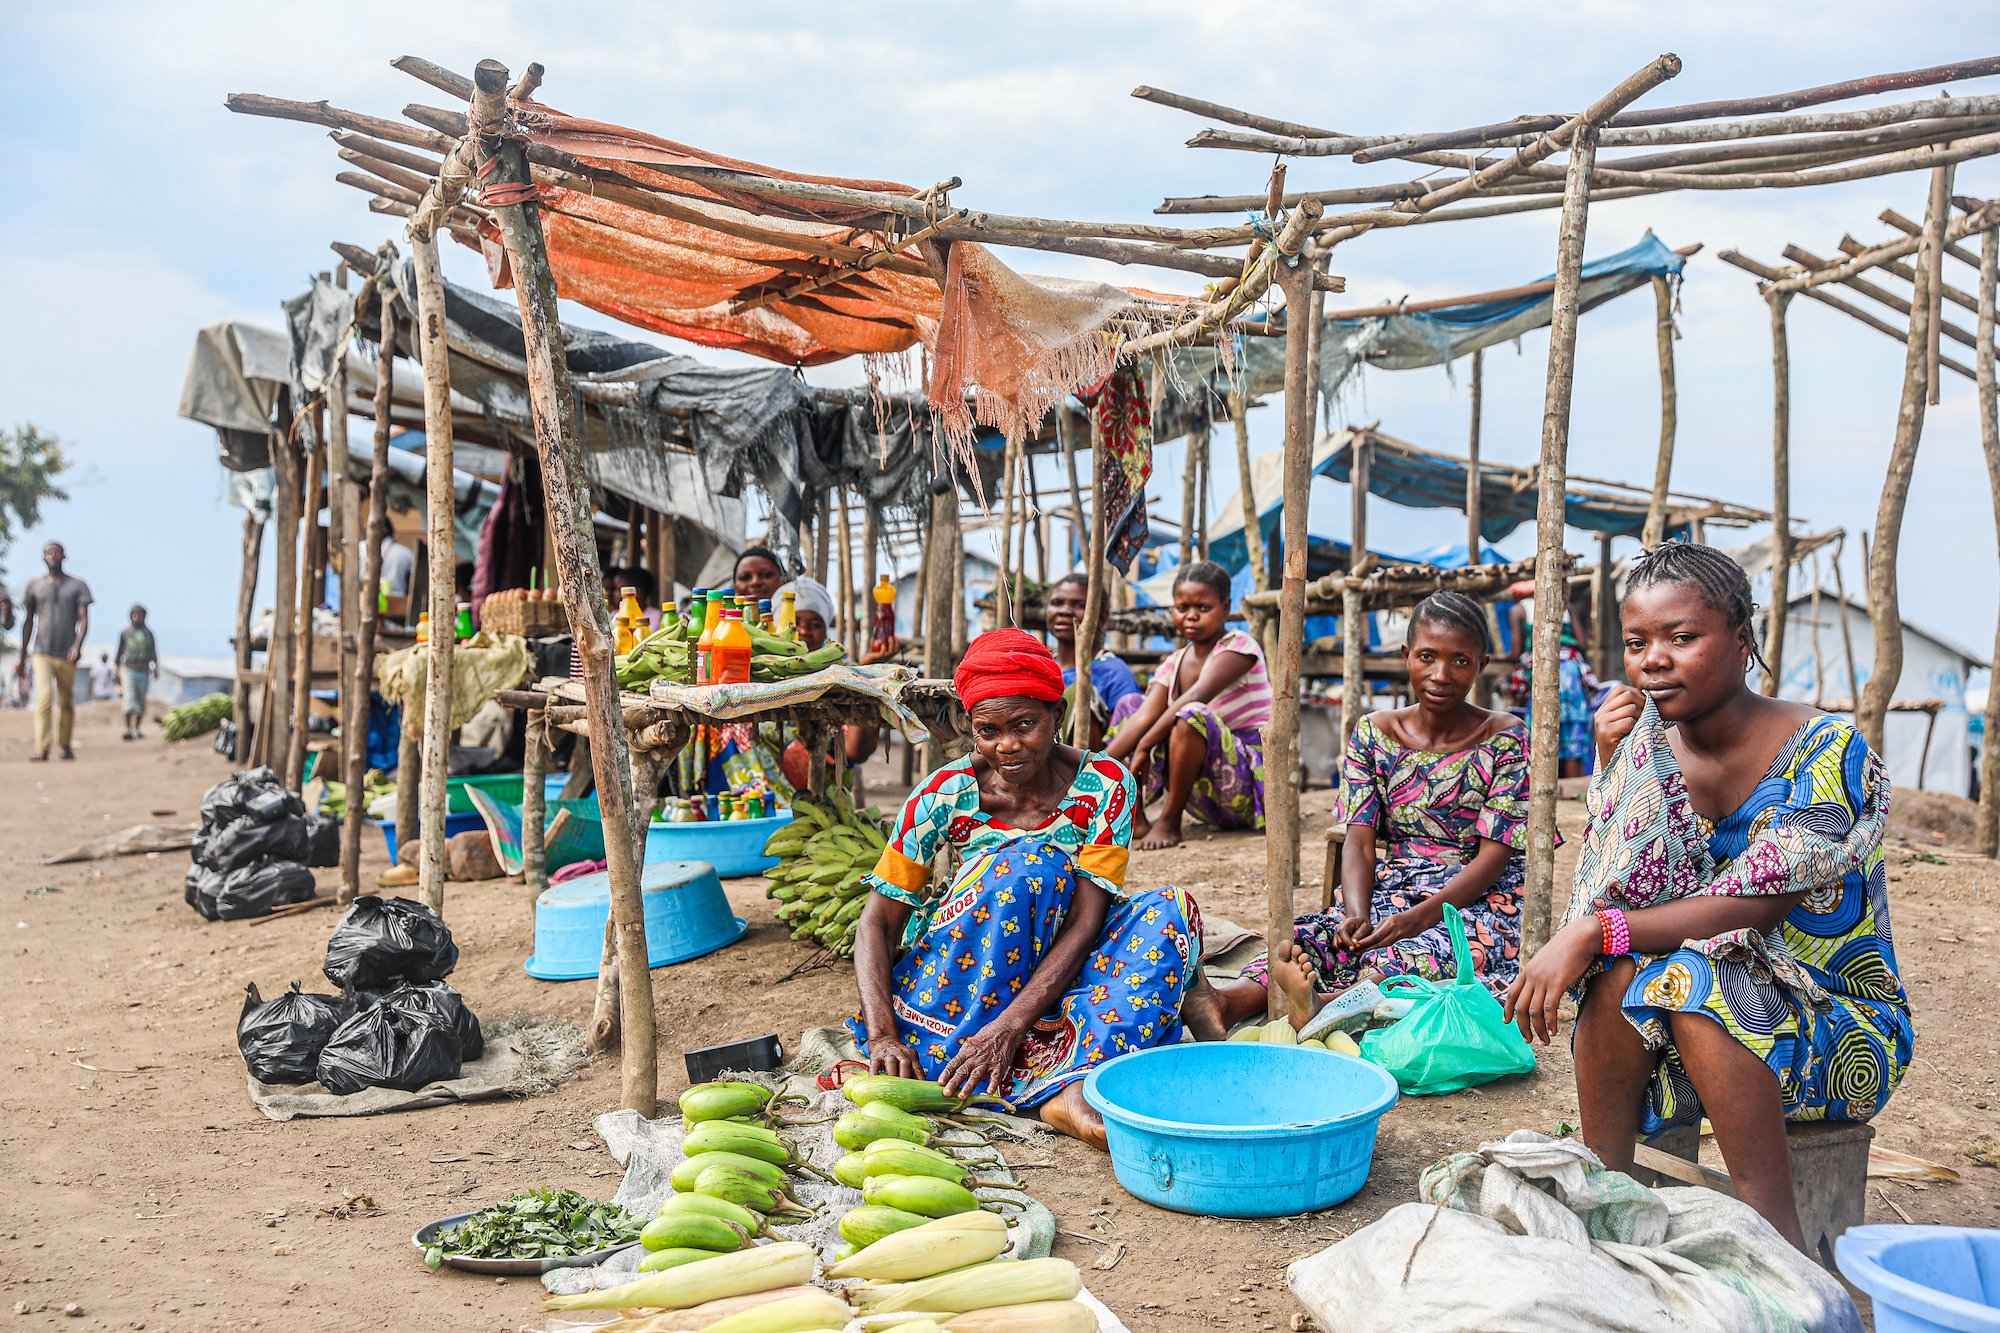 A group of women selling corn in eastern Democratic Republic of the Congo.